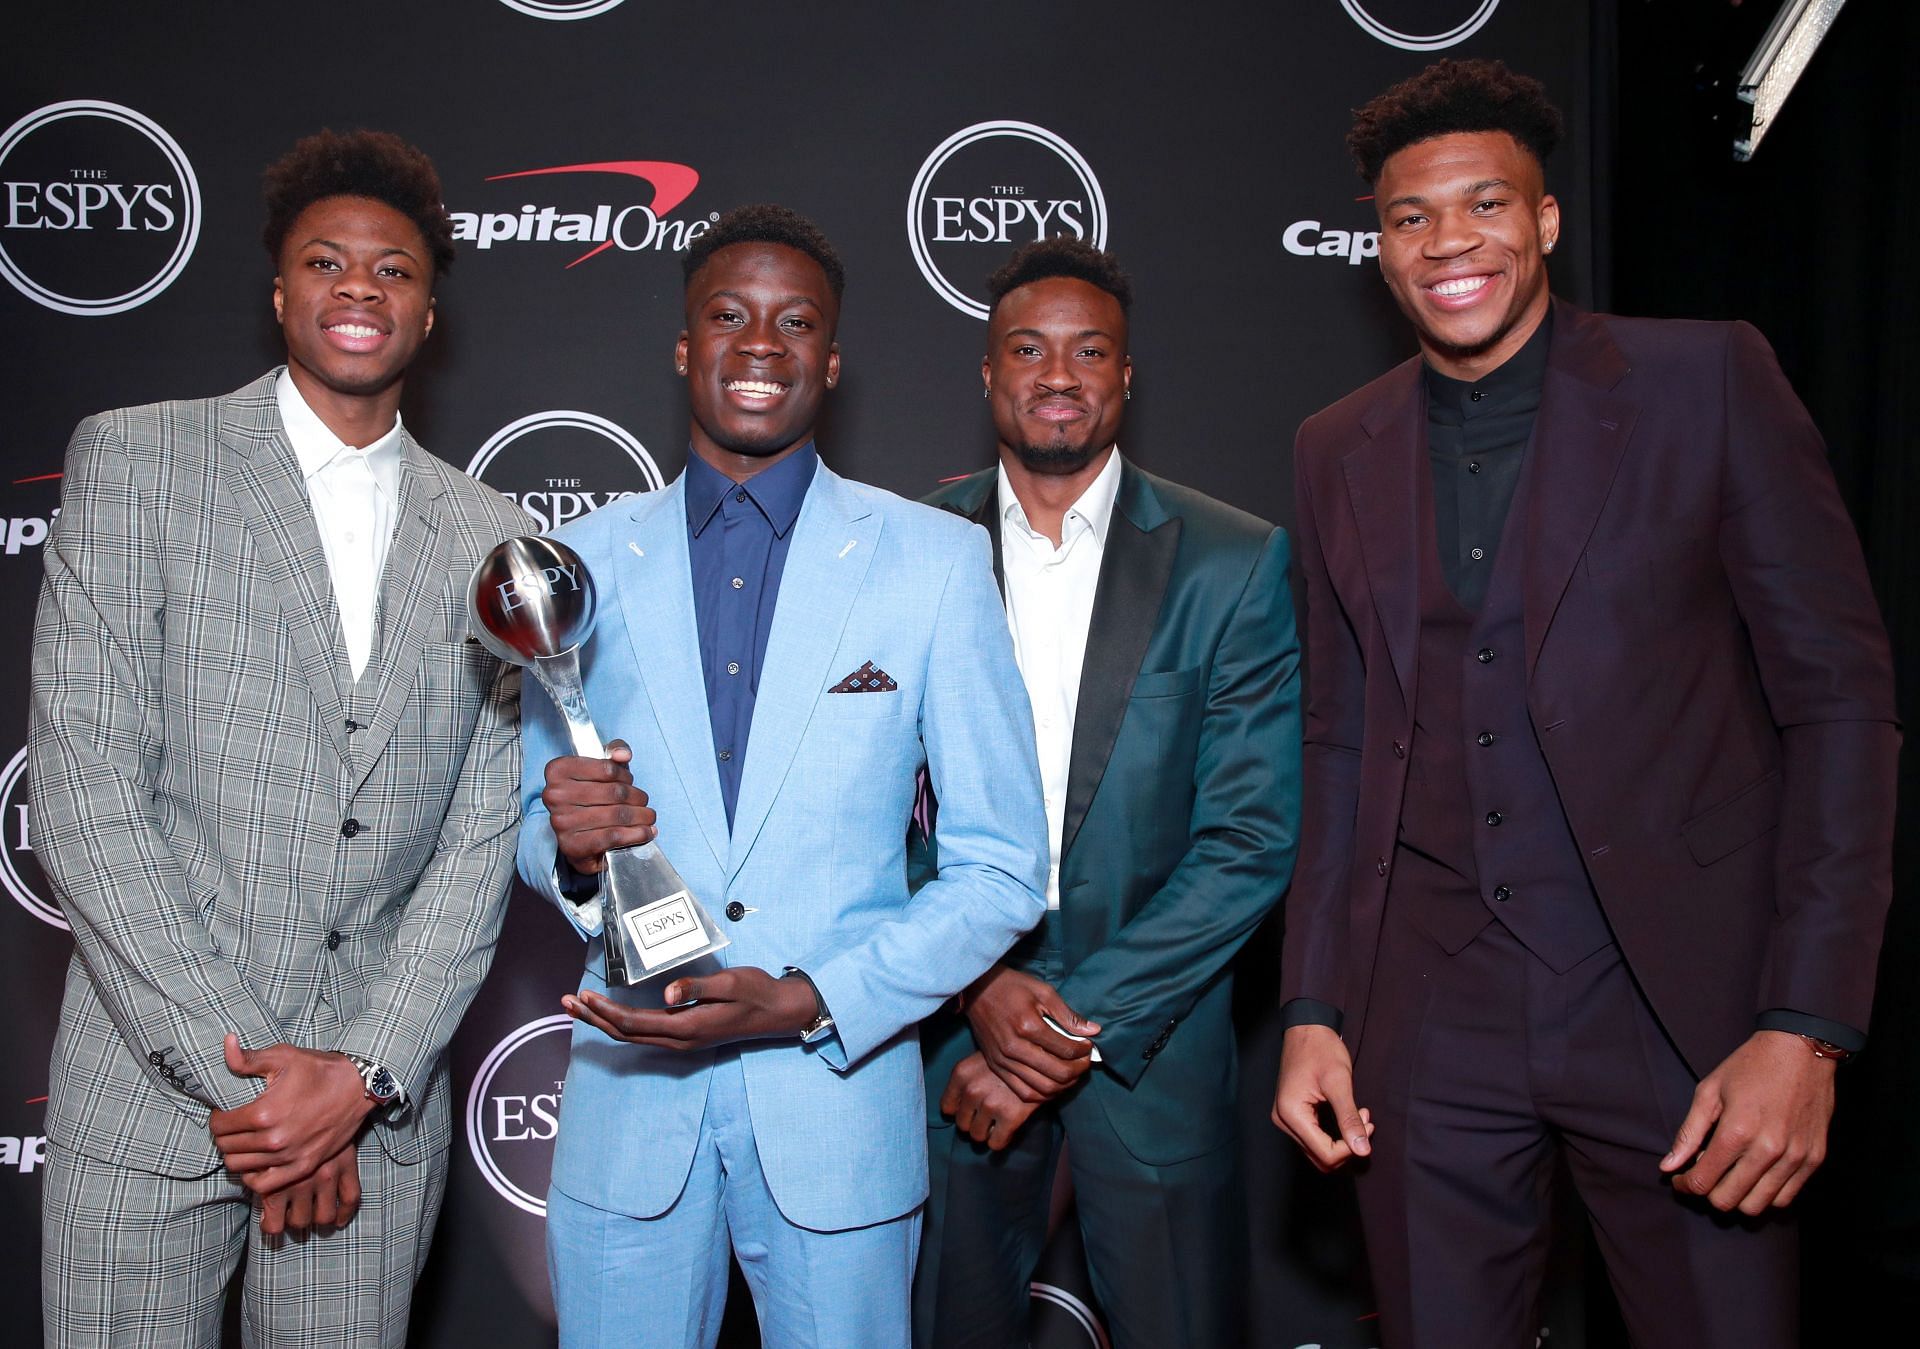 Giannis Antetokounmpo with his brothers during The 2019 ESPYs - Inside